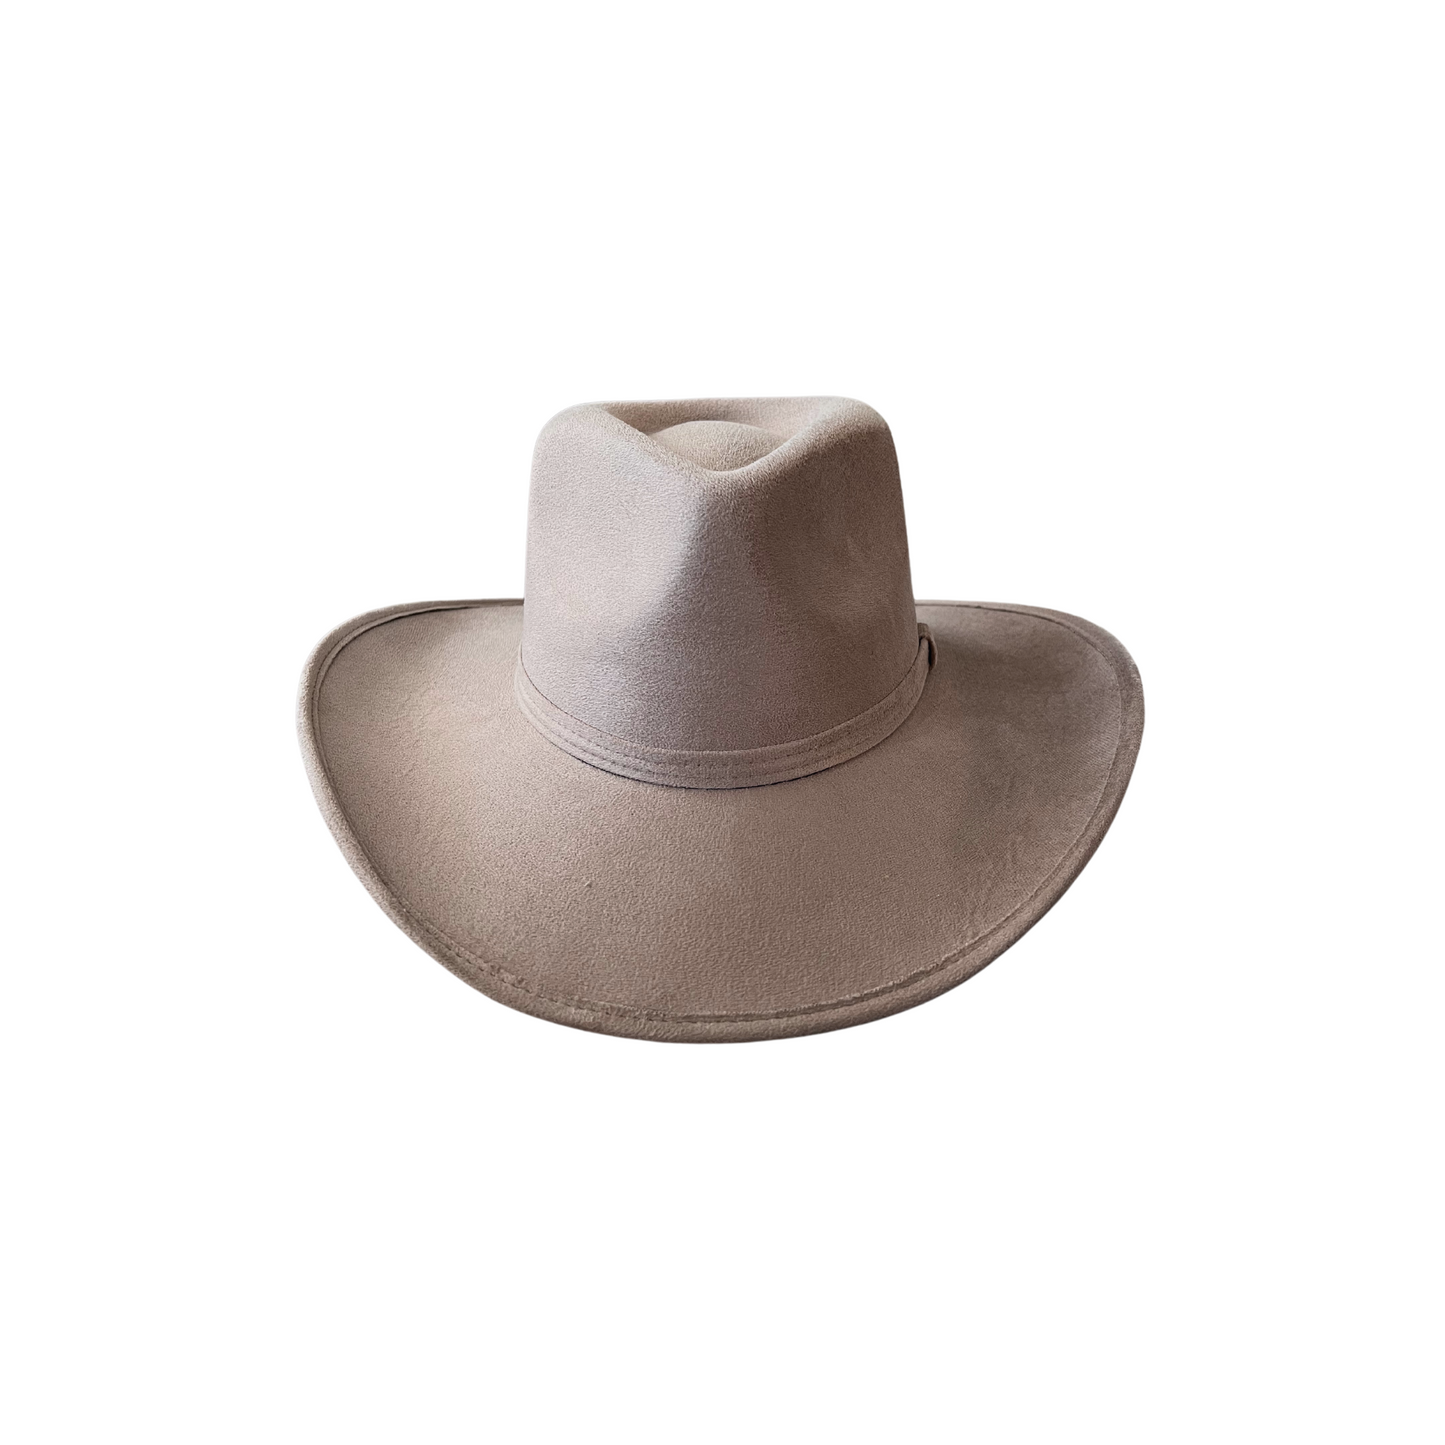 The Bronco Cowboy- Taupe